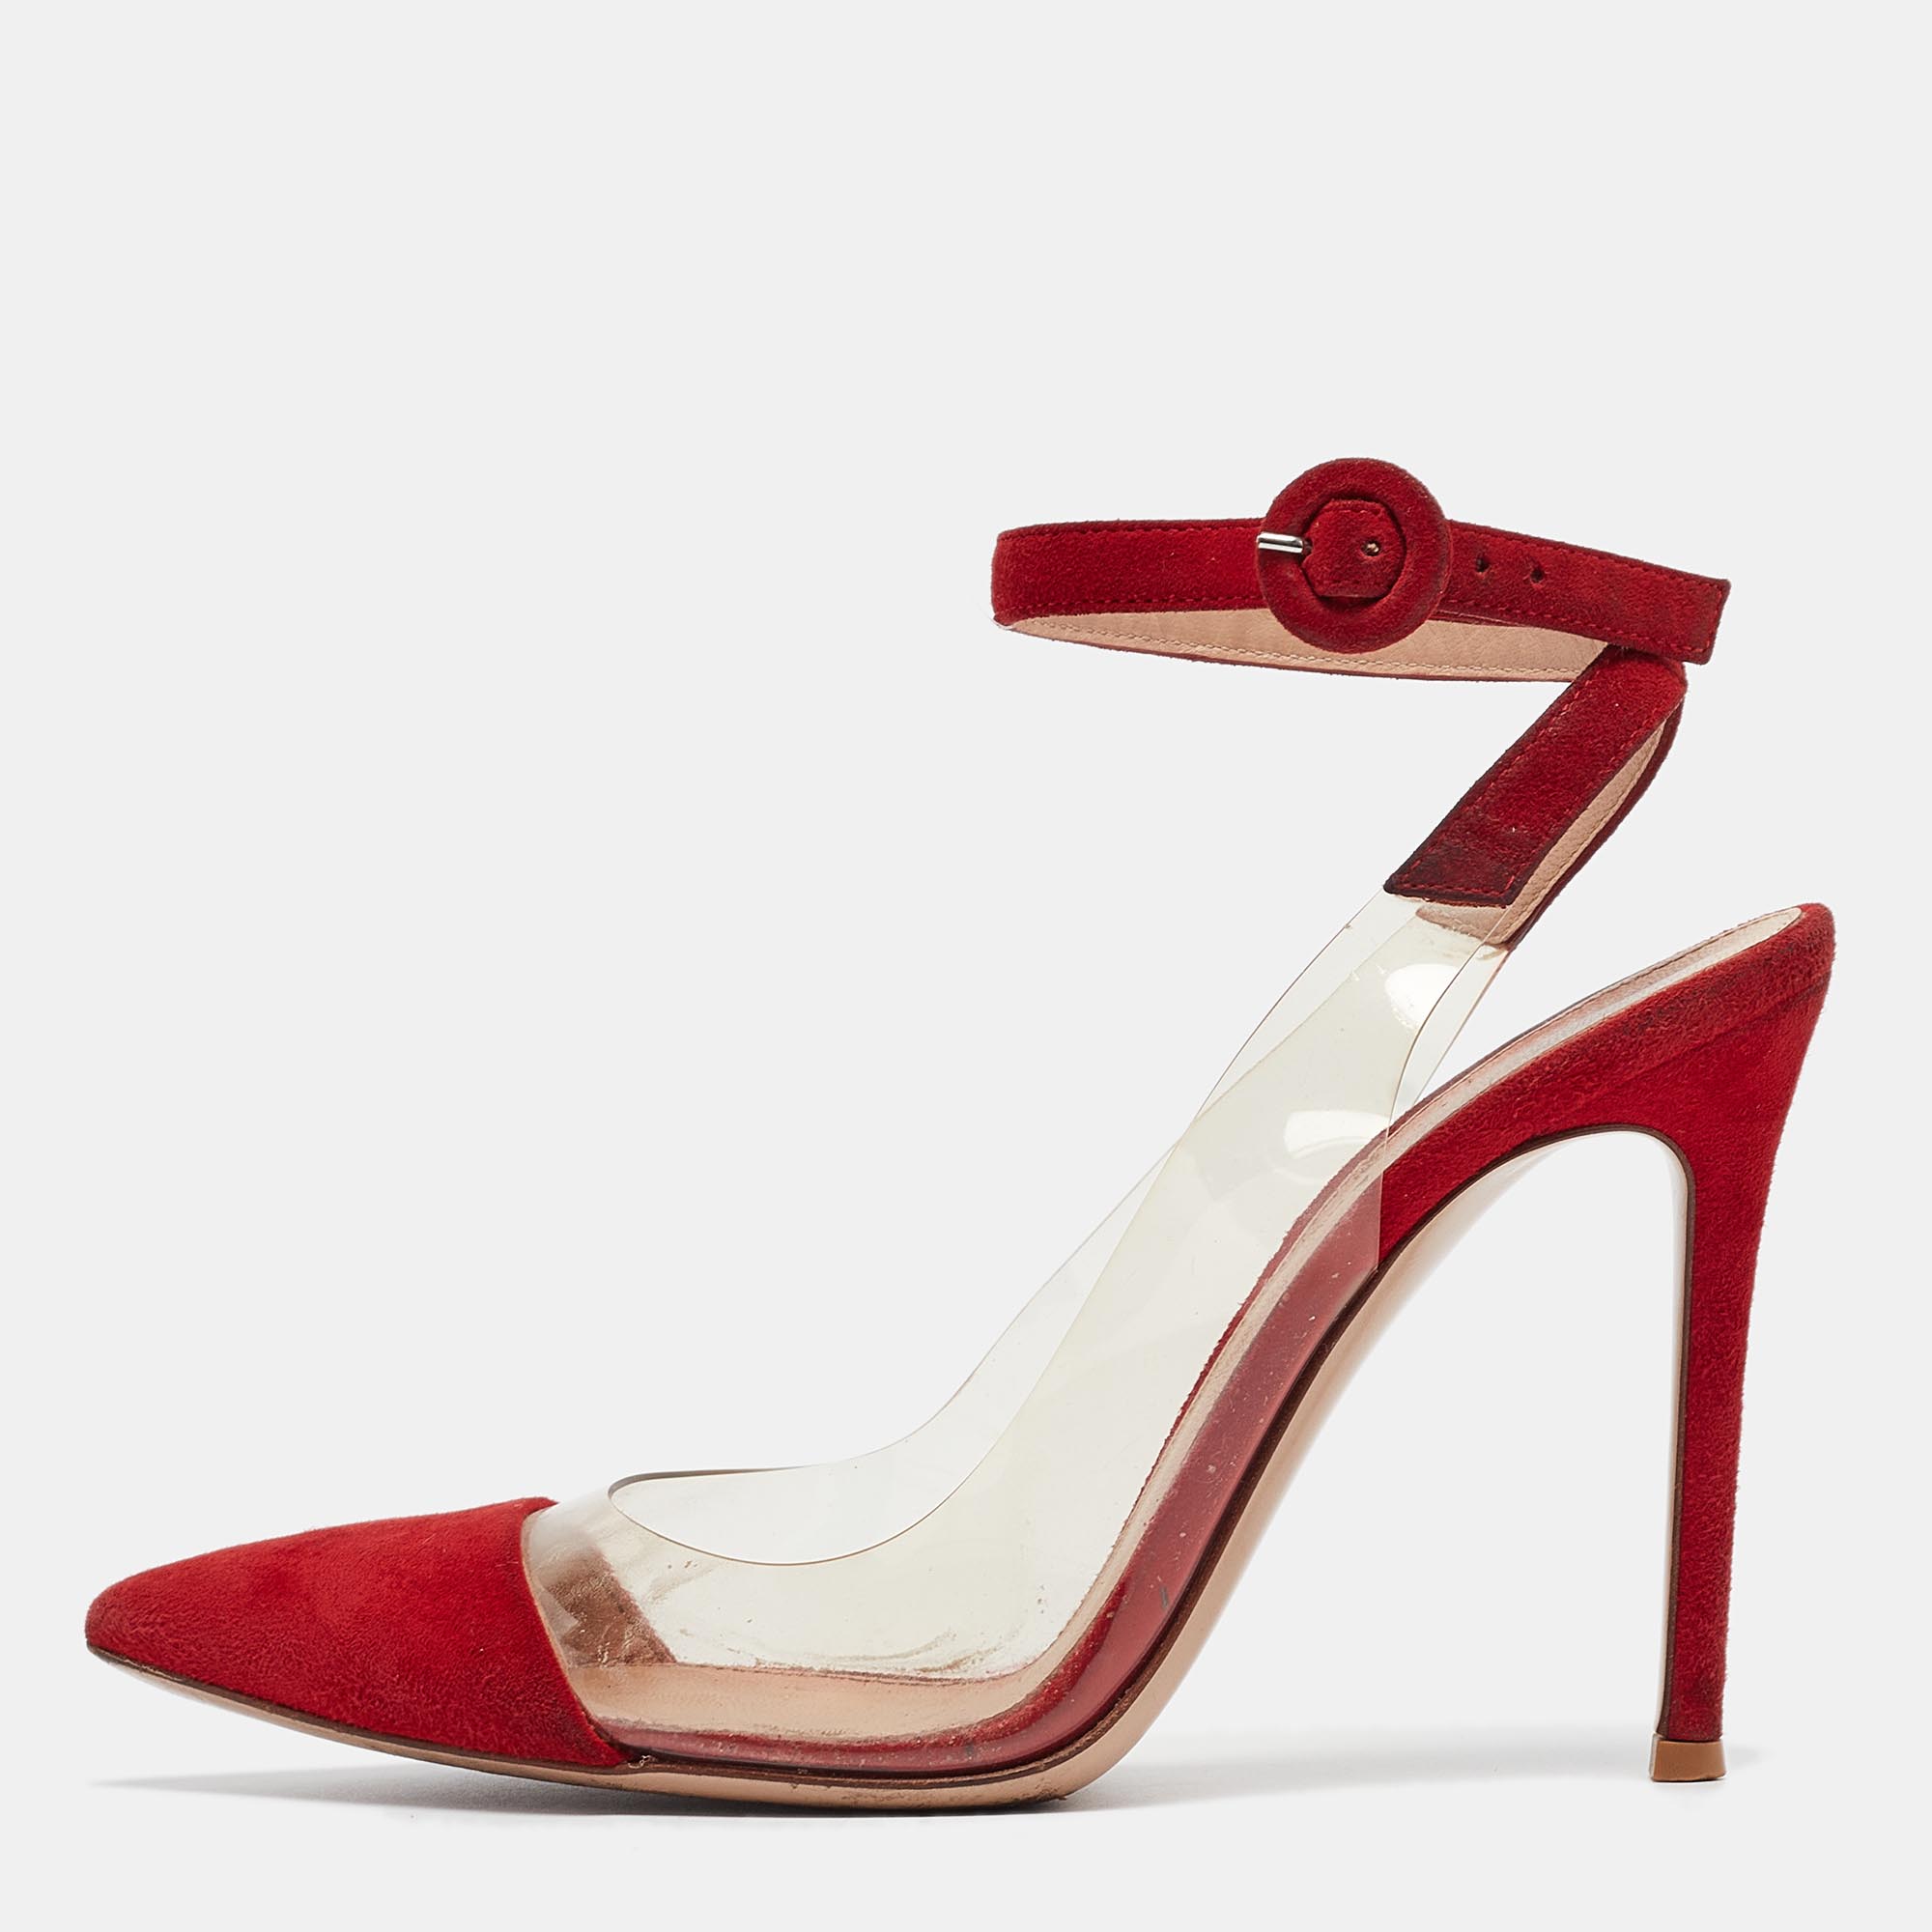 Gianvito rossi red suede and pvc anise pumps size 36.5